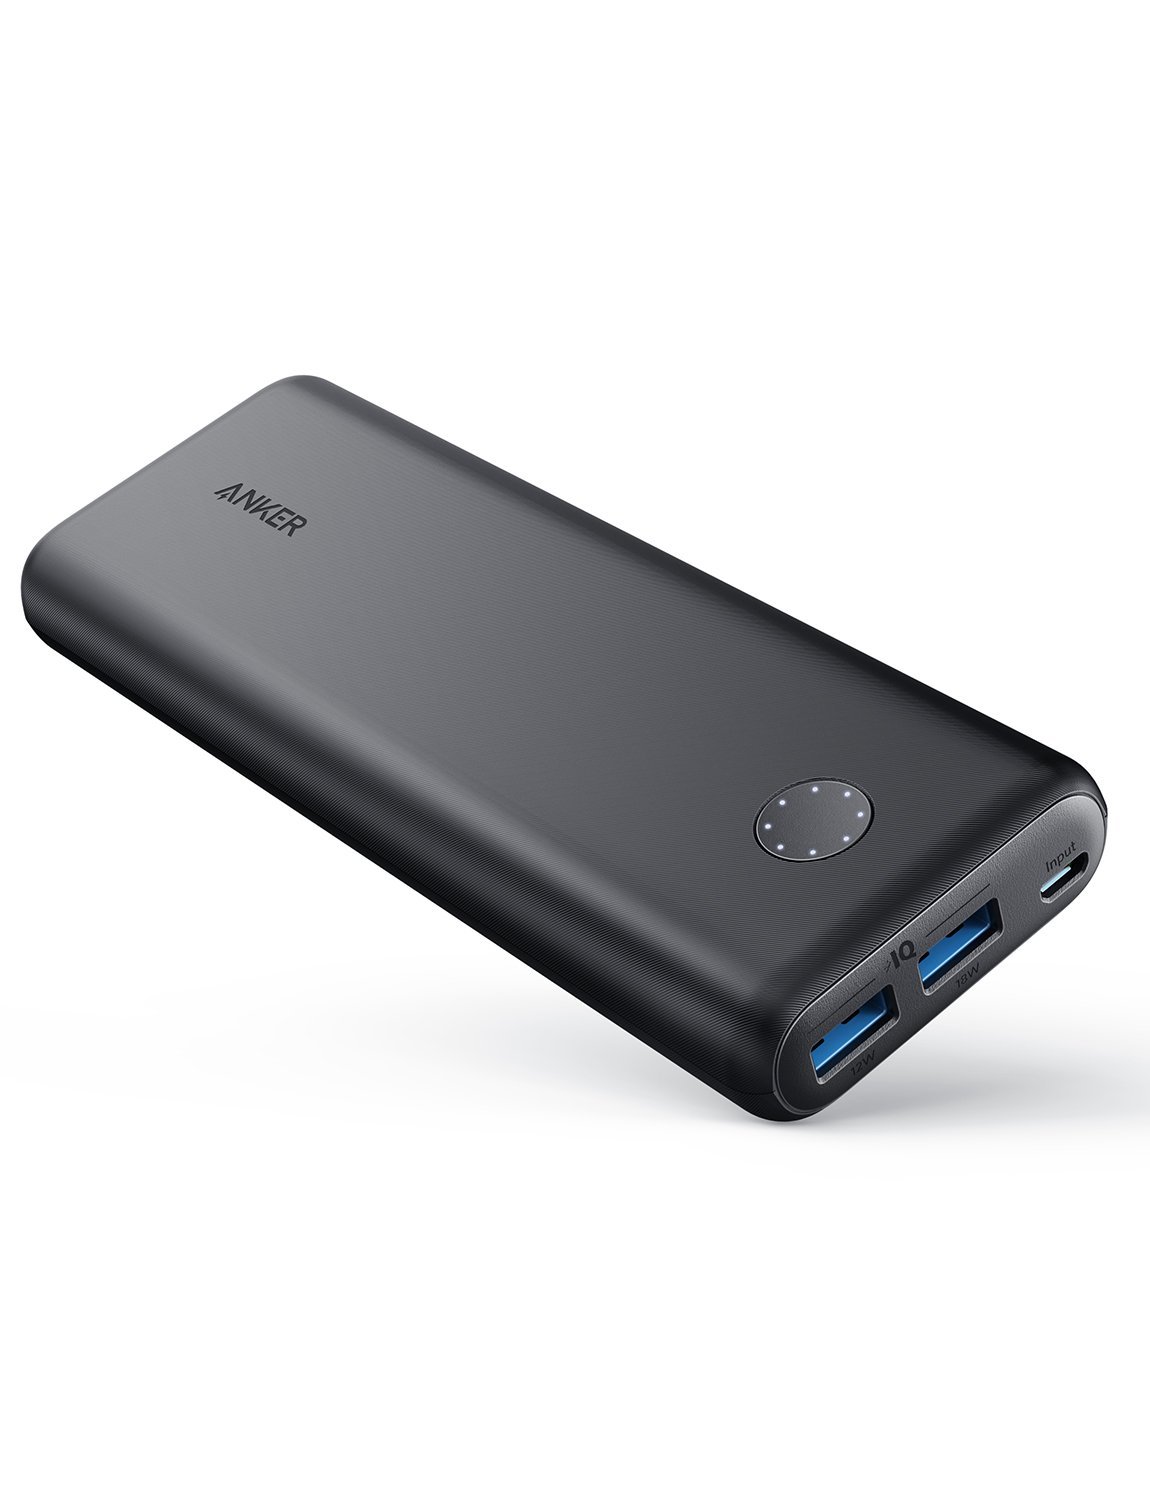 Anker PowerCore II 20000, High Capacity Portable Charger with Dual USB Ports for iPhone, Samsung Galaxy and More